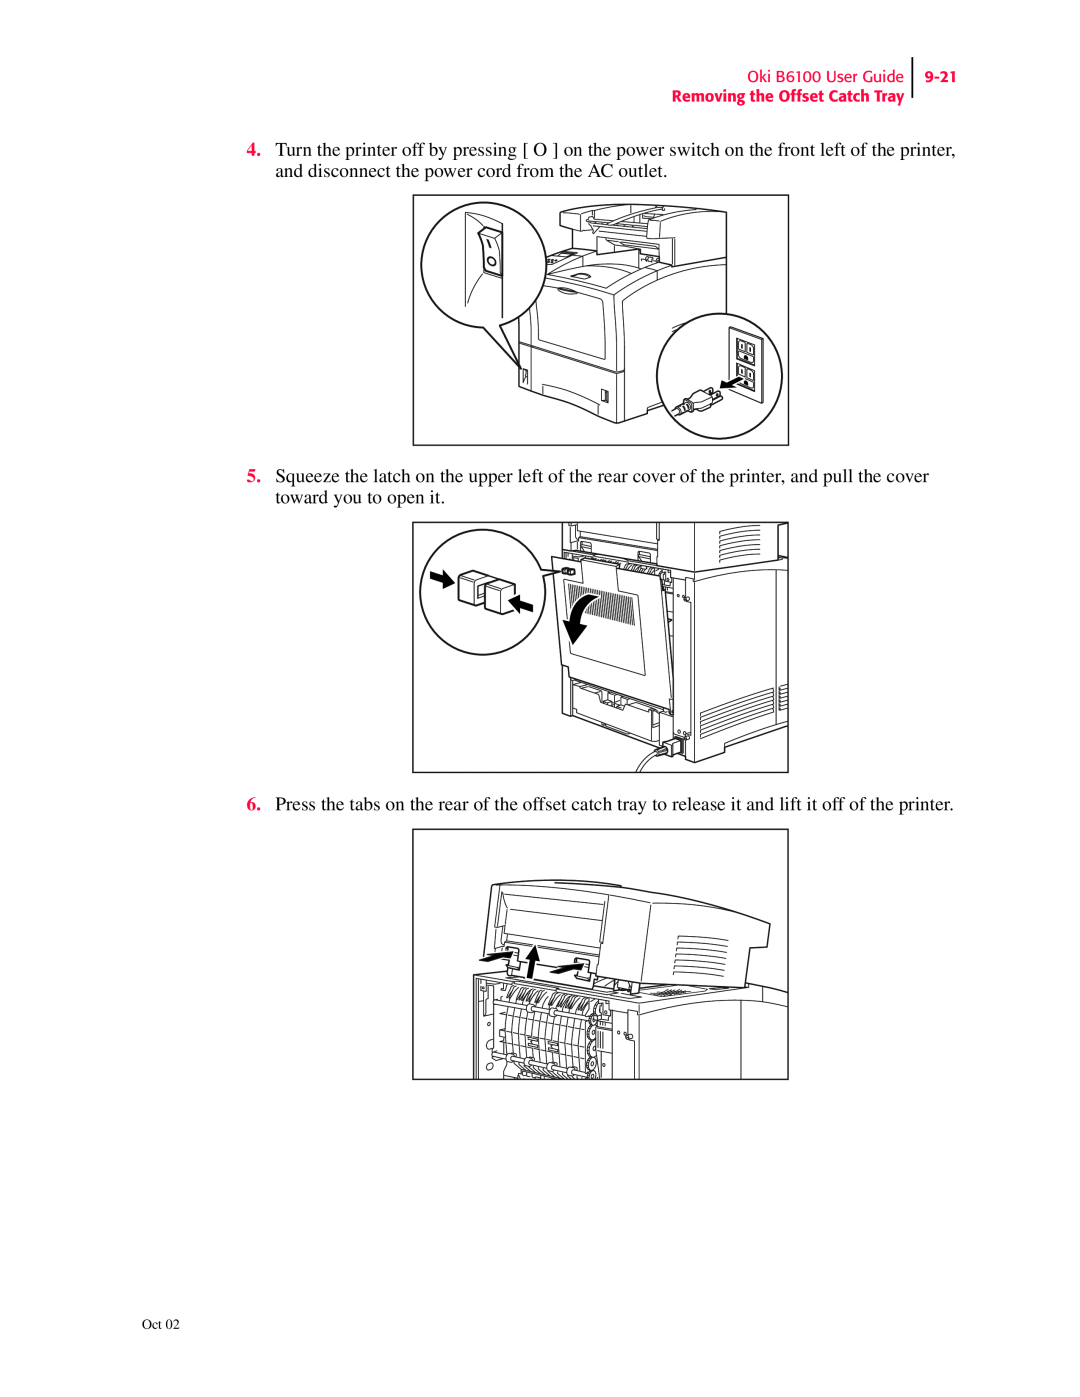 Oki manual Oki B6100 User Guide Removing the Offset Catch Tray, 9-21 